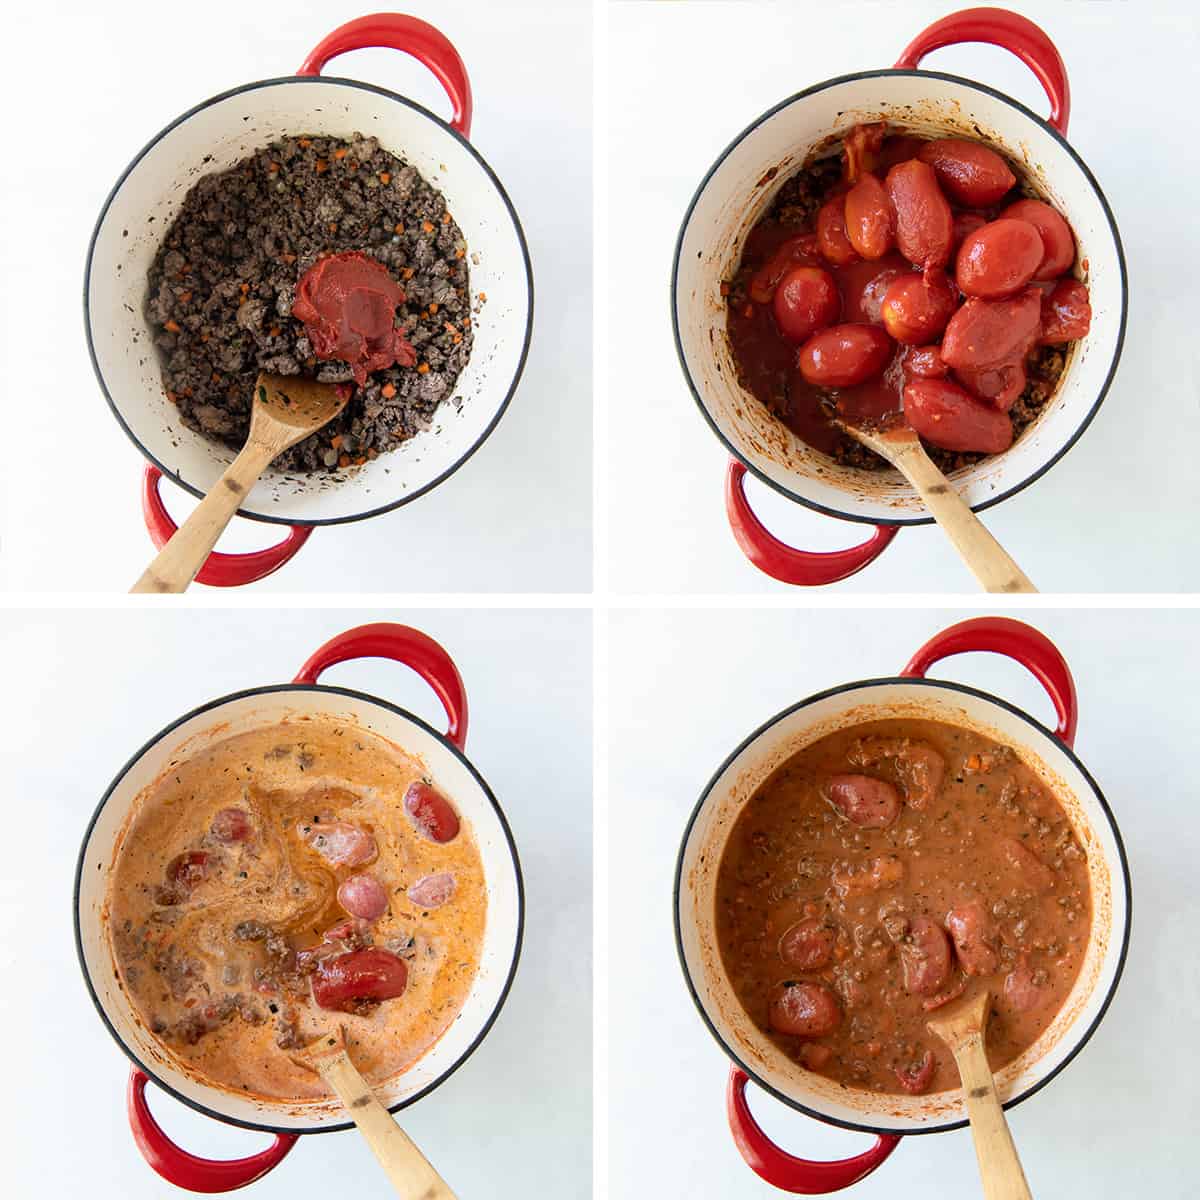 Four images showing tomato paste and whole tomatoes cooking in a meat mixture in a pot then broth and milk are added.